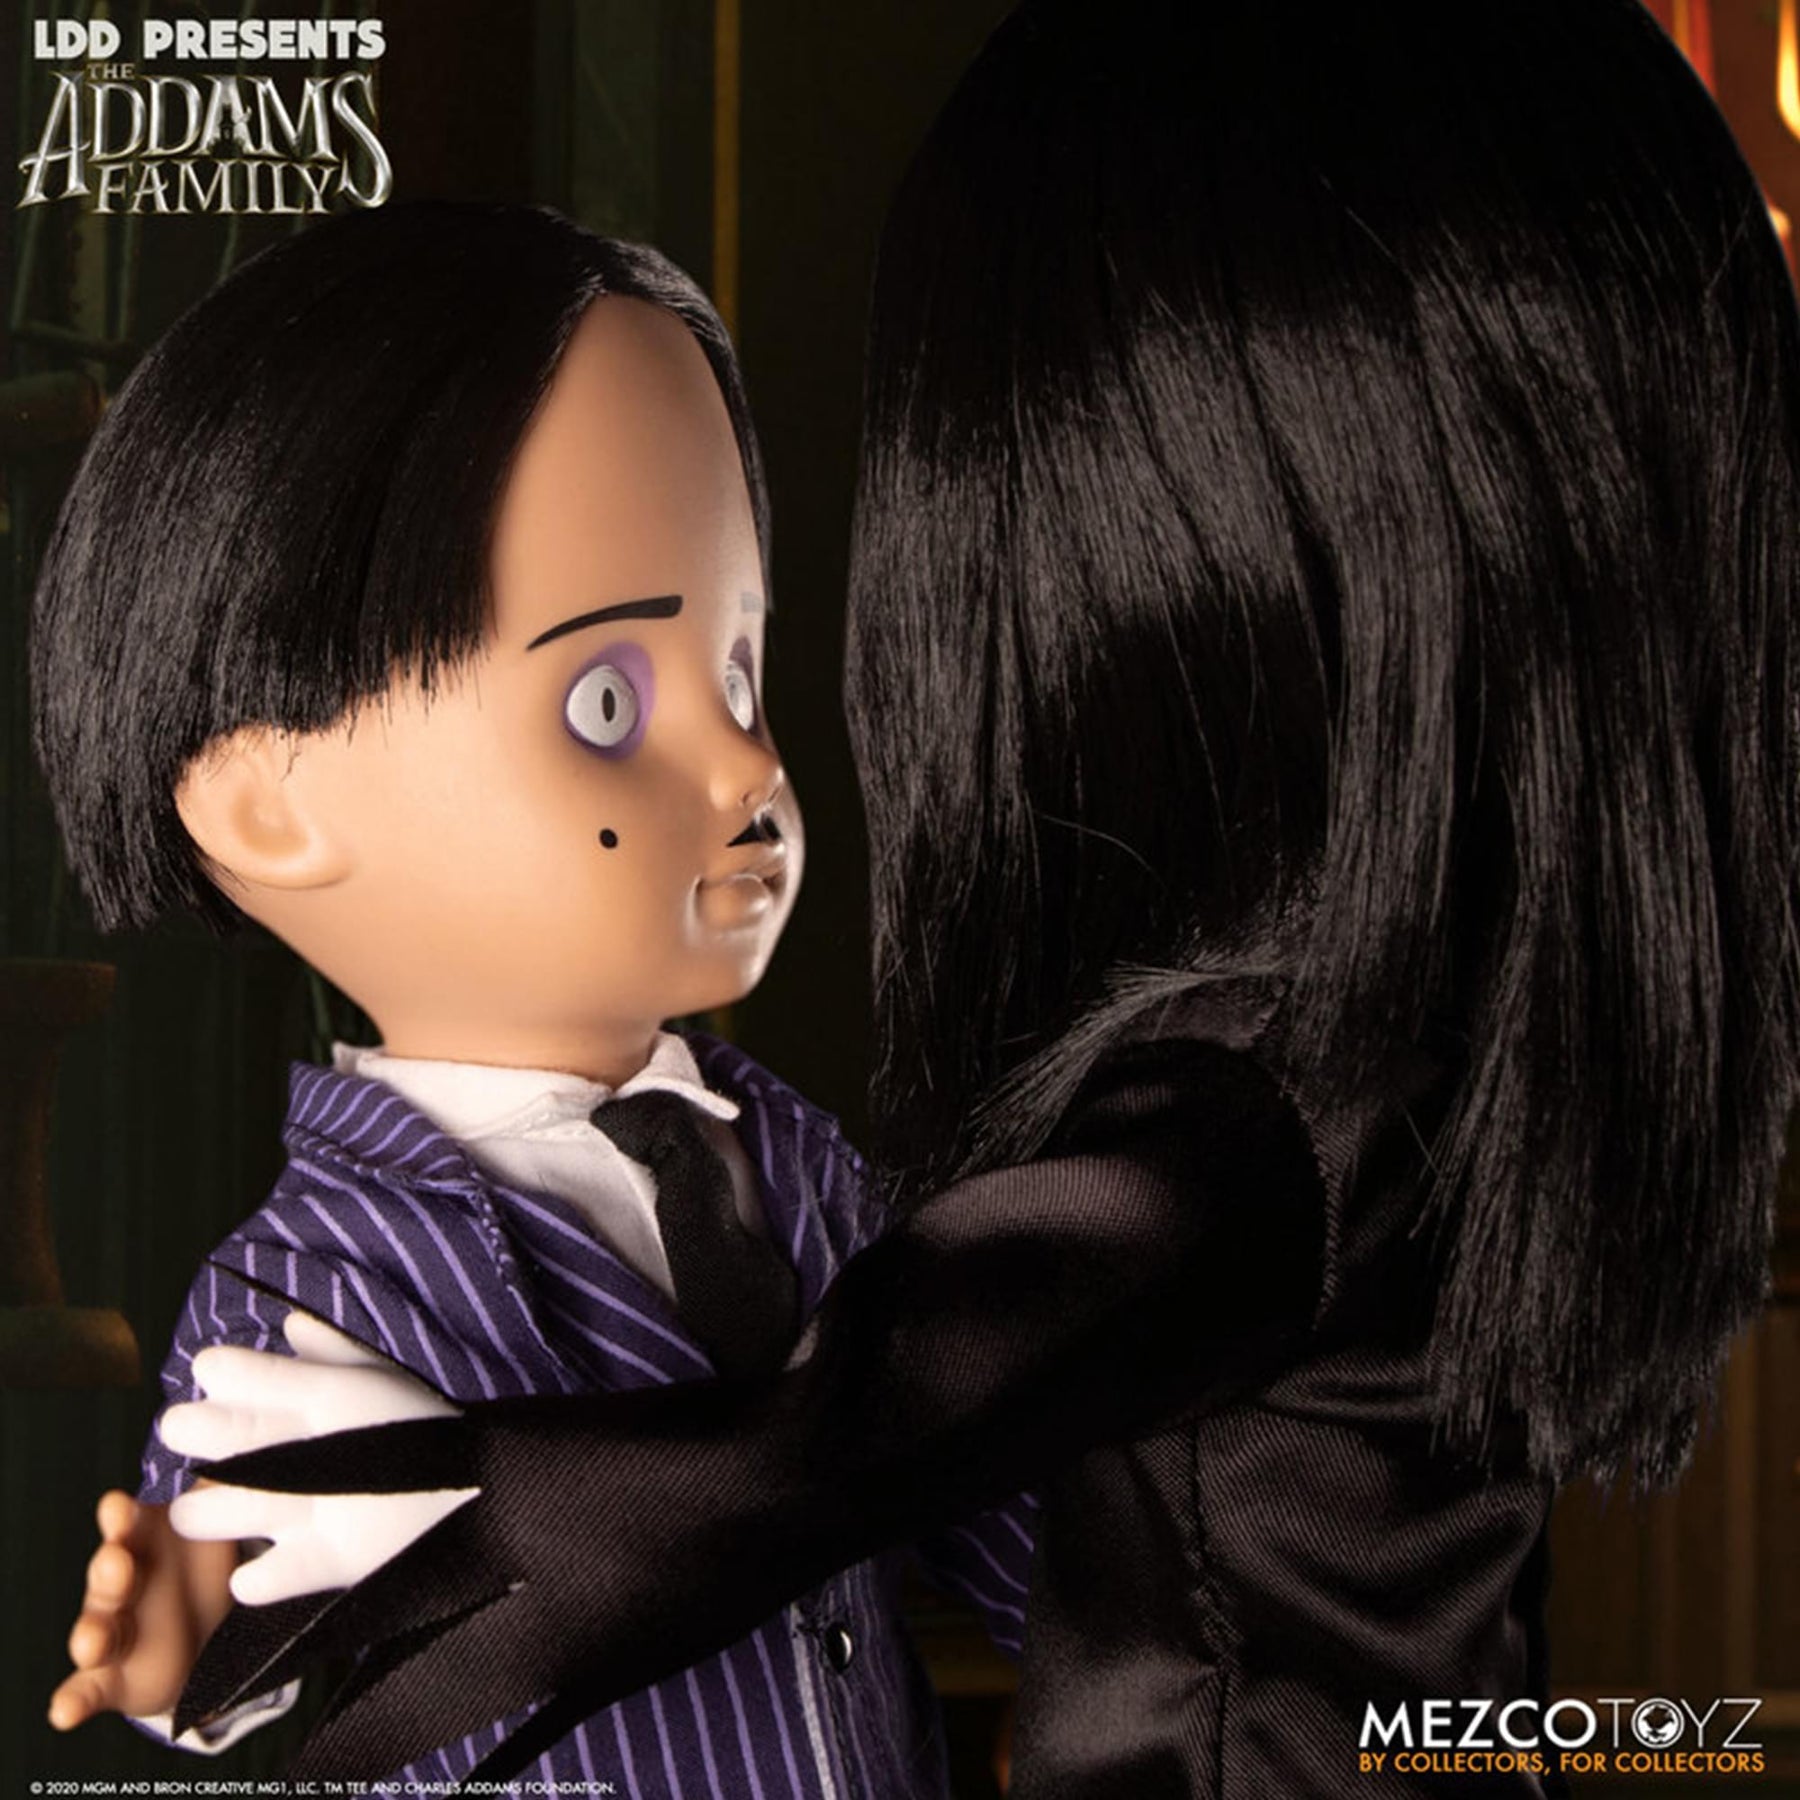 Wednesday Thing Hand Action Figure Anime Addams Family Figure Hand Model  Wednesday Realistic Scary Props Decorations Gift For Fans